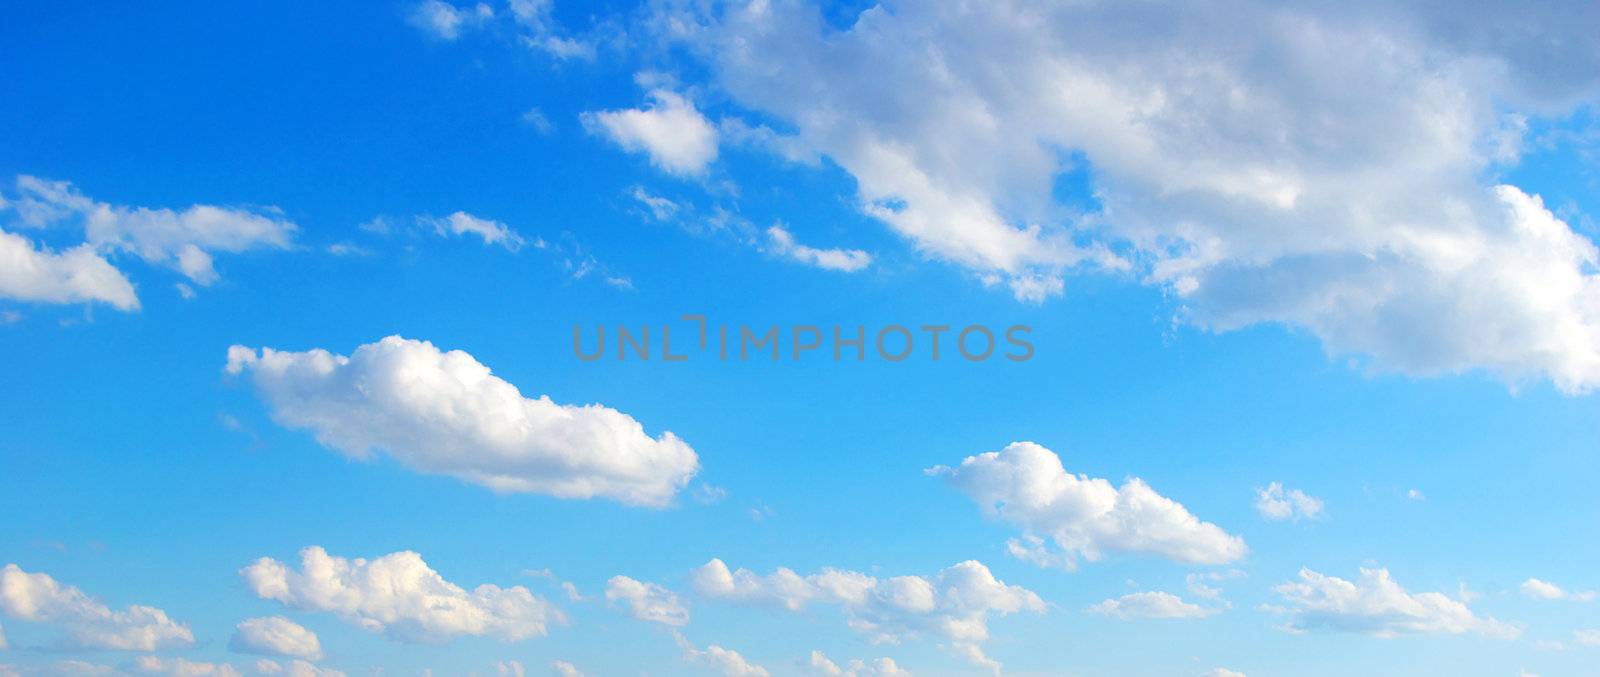 Blue Sky background with tiny clouds